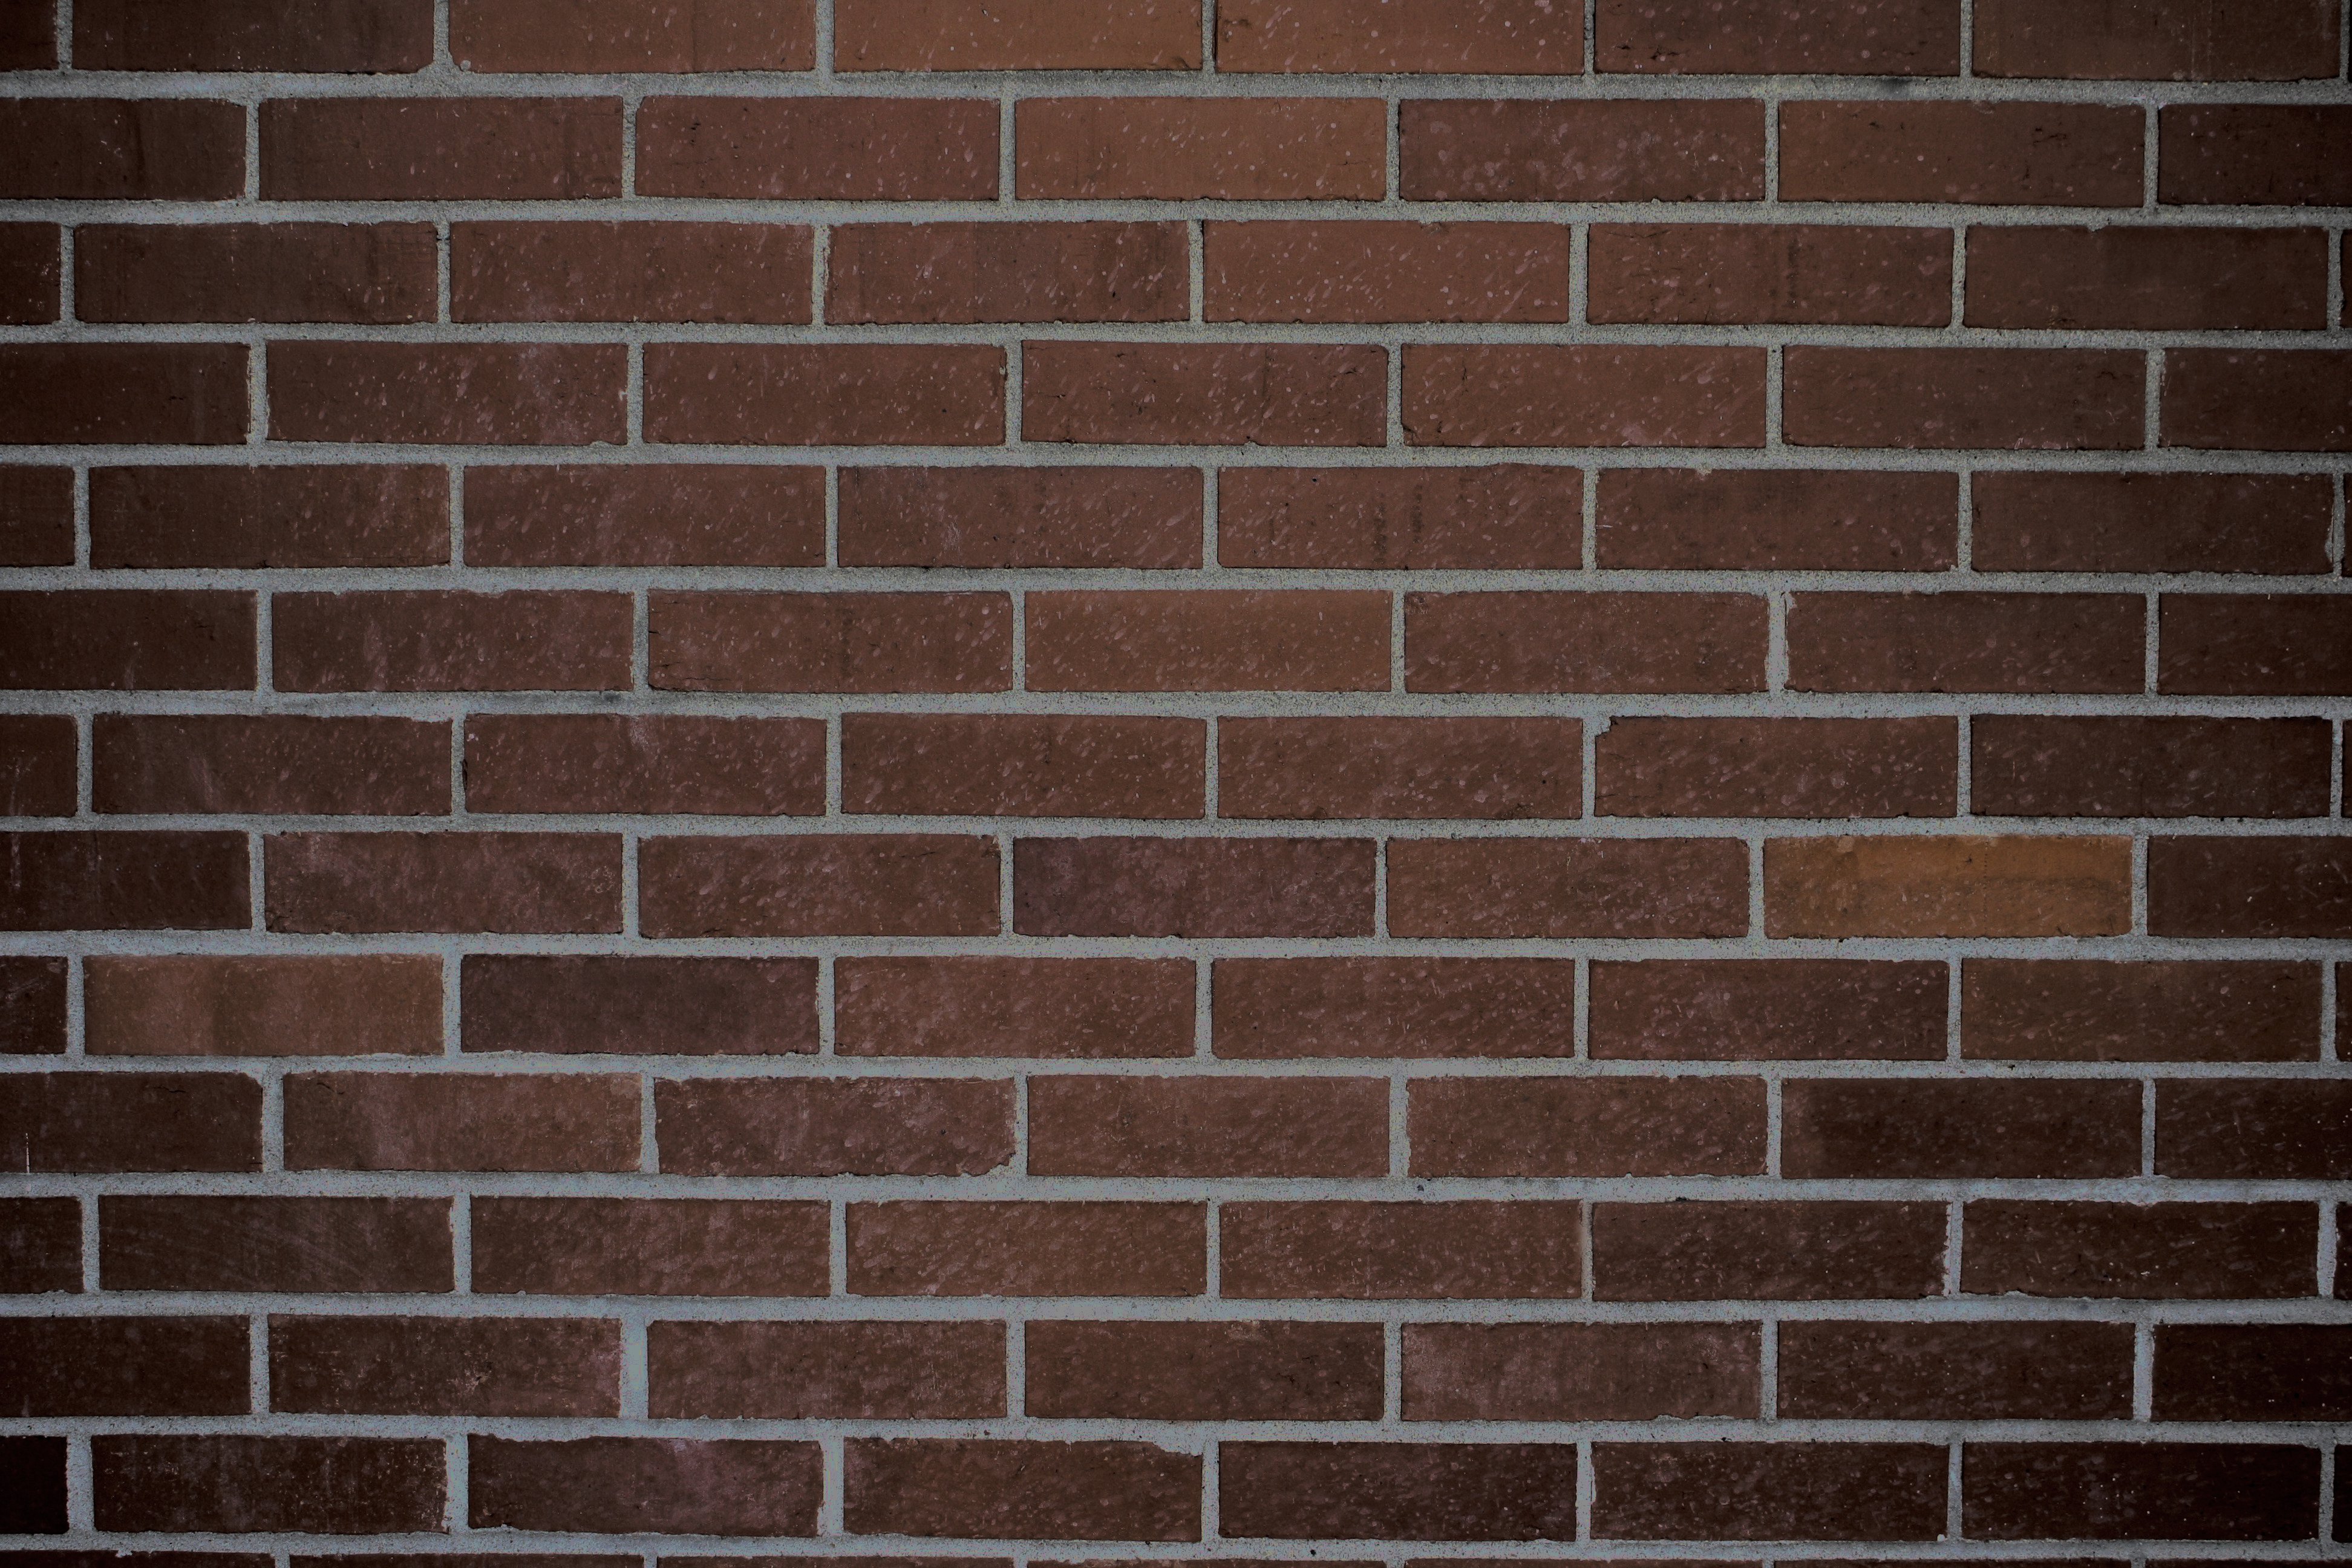 Dark Brown Brick Wall Texture Picture   Free Photograph   Photos